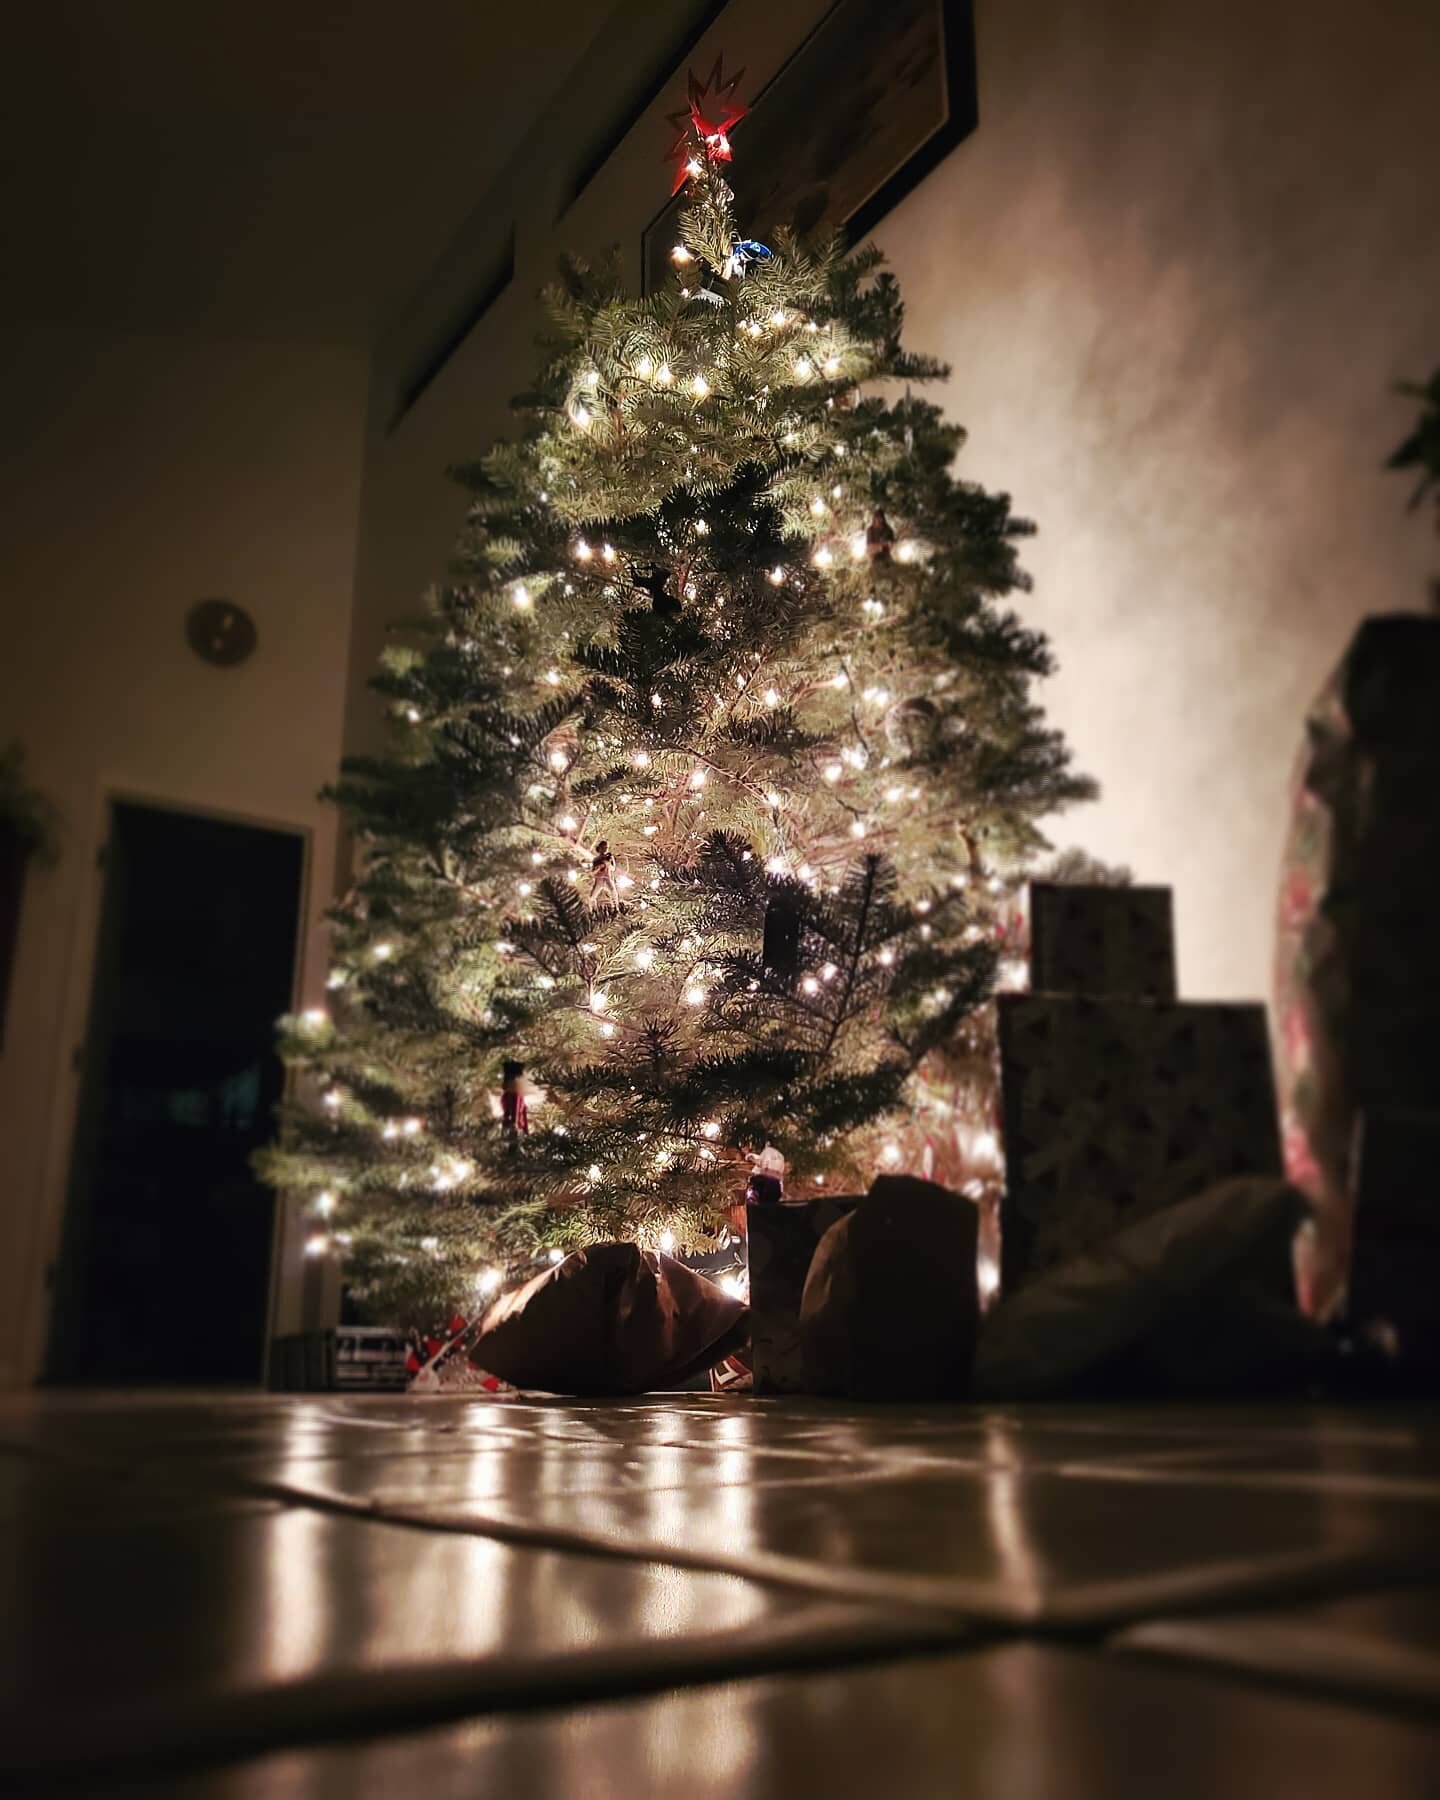 Christmas Eve 2020, this year has really brought us back to ourselves. I'm so thankful for all of the love and experiences this year has brought. I'm also thankful for the darkness because without it we couldn't appreciate the light.

Hope everyone f